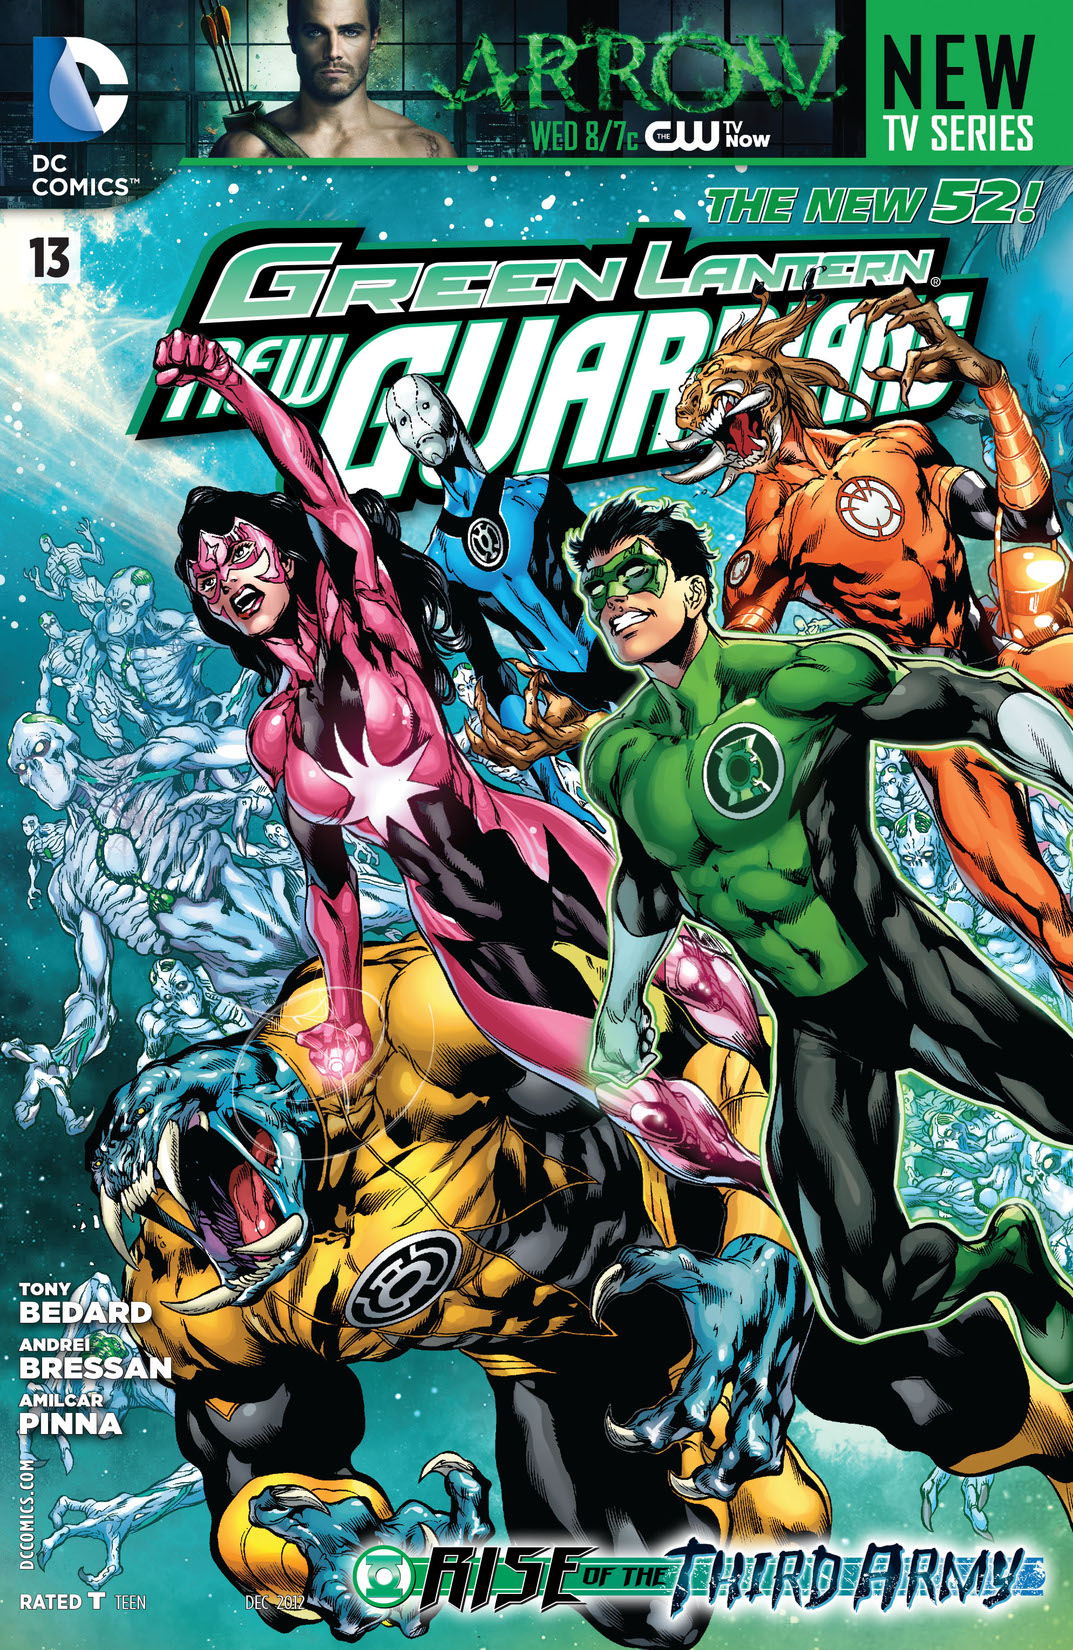 Green Lantern: New Guardians #13 preview images